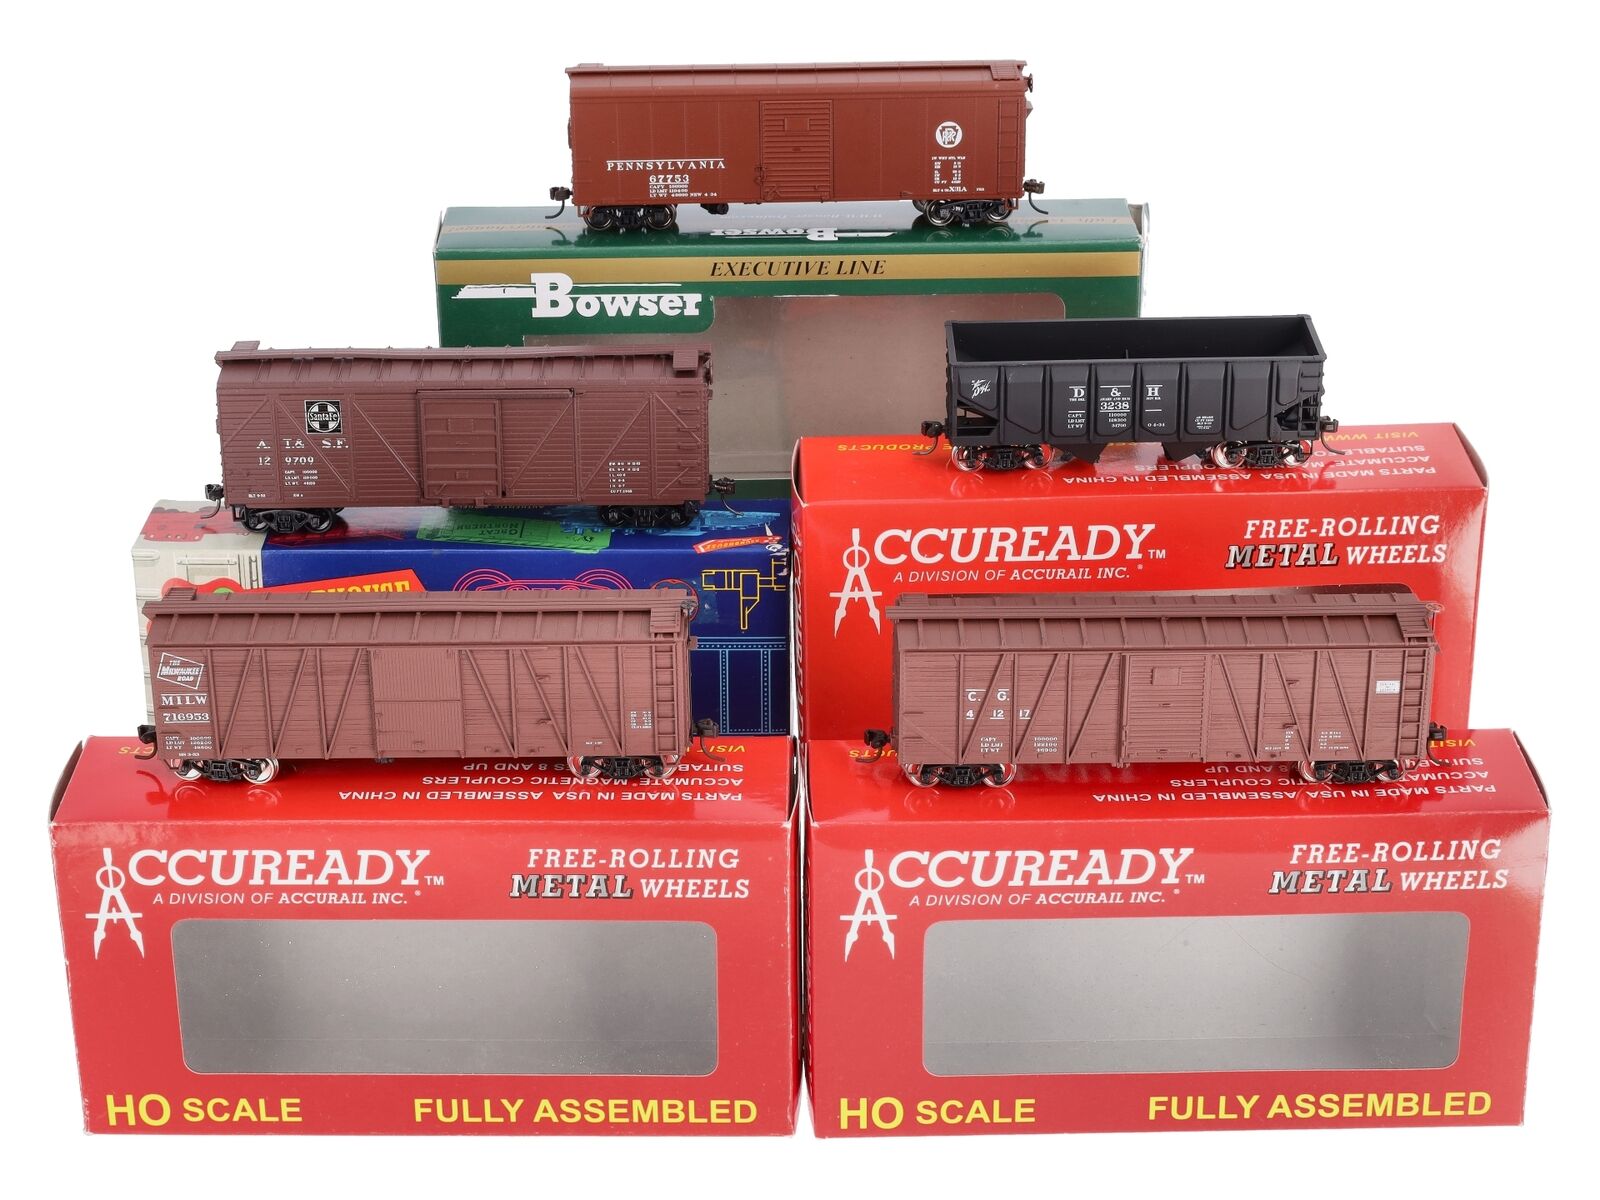 Accuready & Other HO Assorted Freight Cars: 67753, 94103, 94508, 92808, 1031 [5]